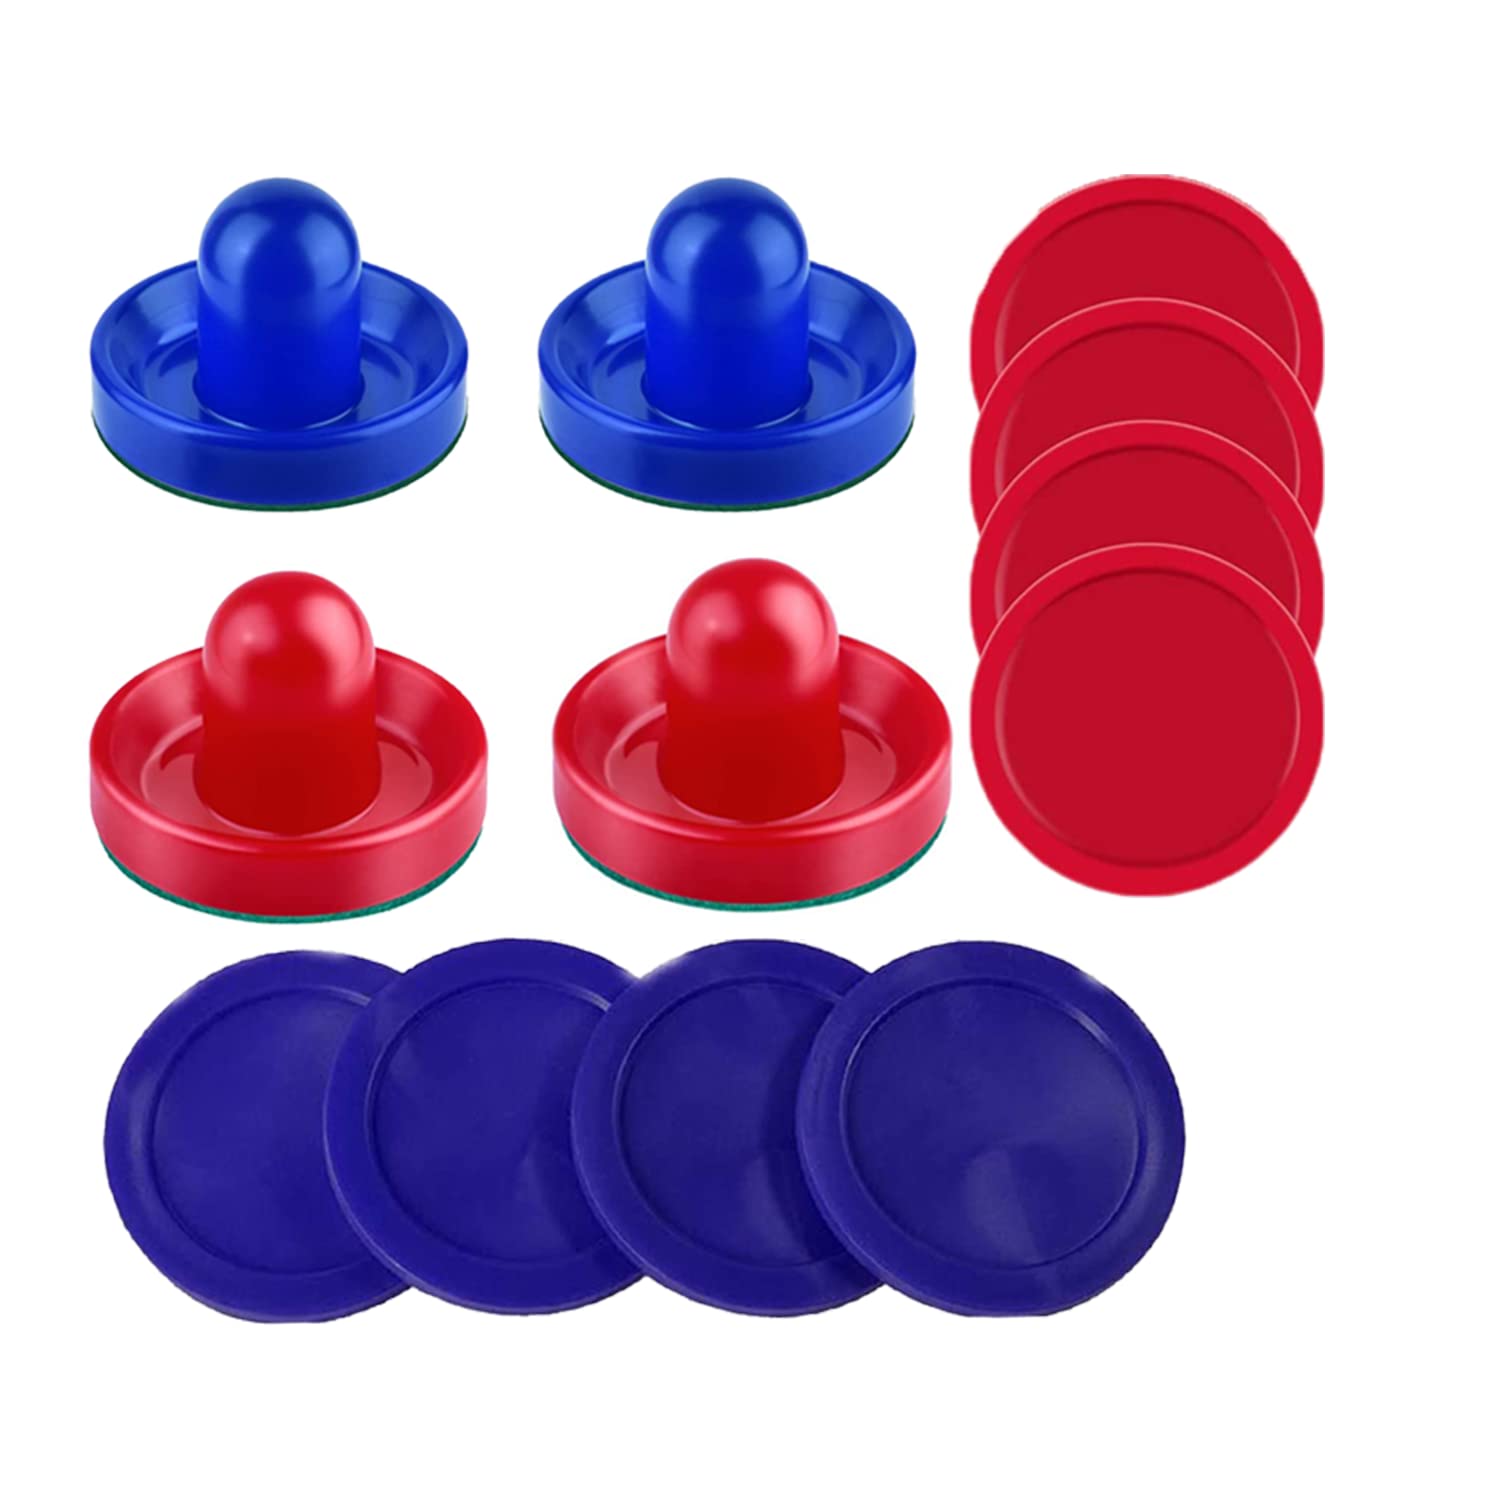 INSCOOL Air Hockey Pushers and Air Hockey Pucks Air Hockey Paddles, Goal Handles Paddles Replacement Accessories for Game Tables(4Pushers, 8Pucks)